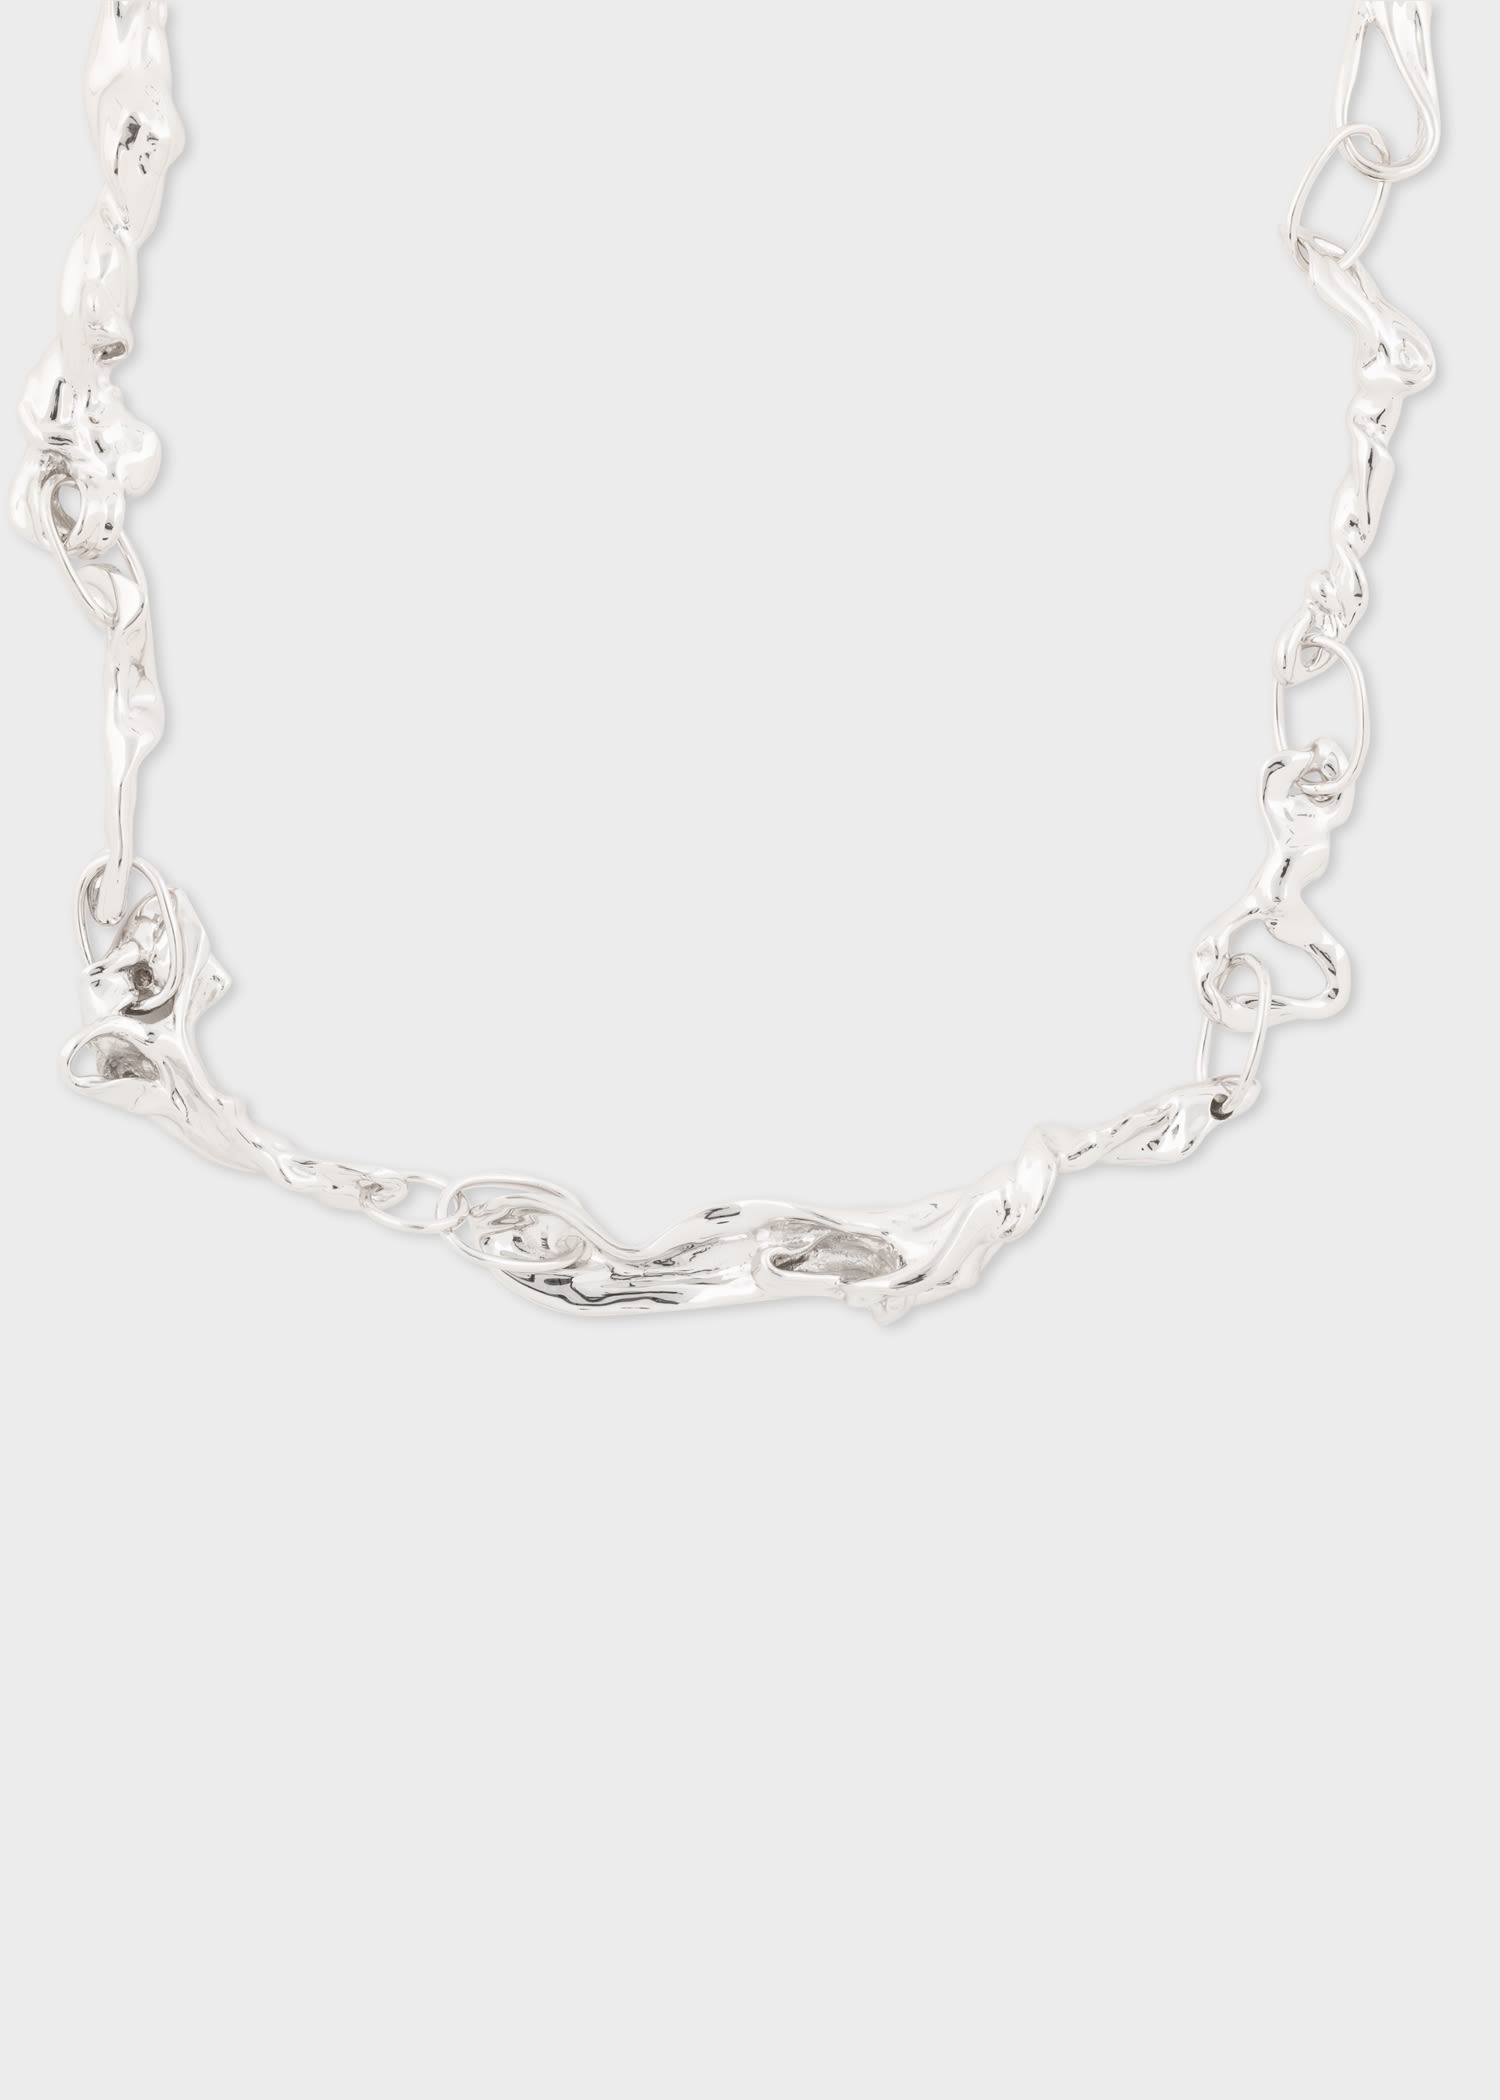 'Treacle' Rhodium Necklace by Completedworks - 1